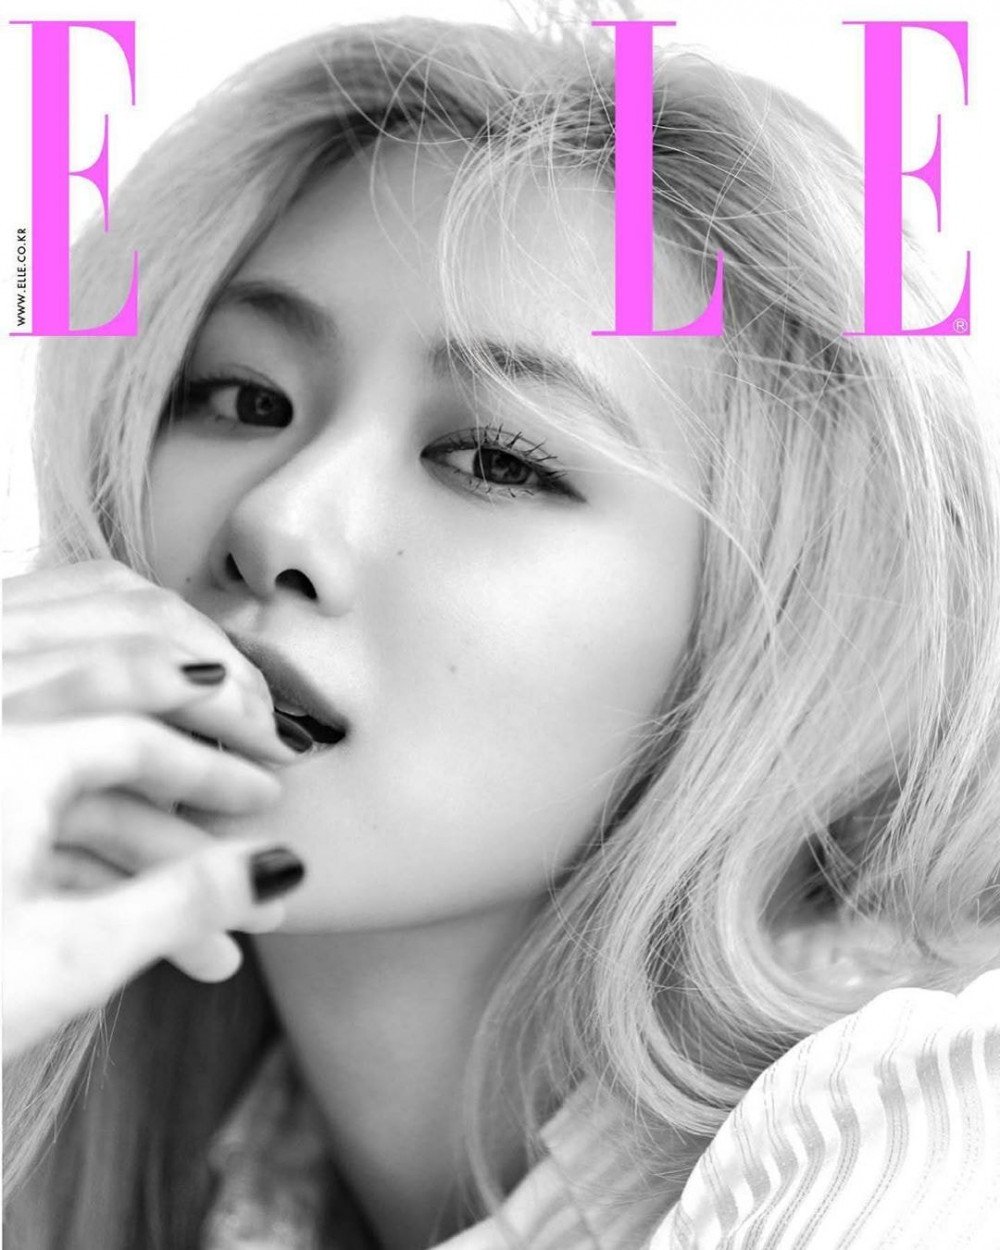 blackpink-rose-interests-fans-by-her-charm-as-the-model-on-the-july-cover-of-elle-3